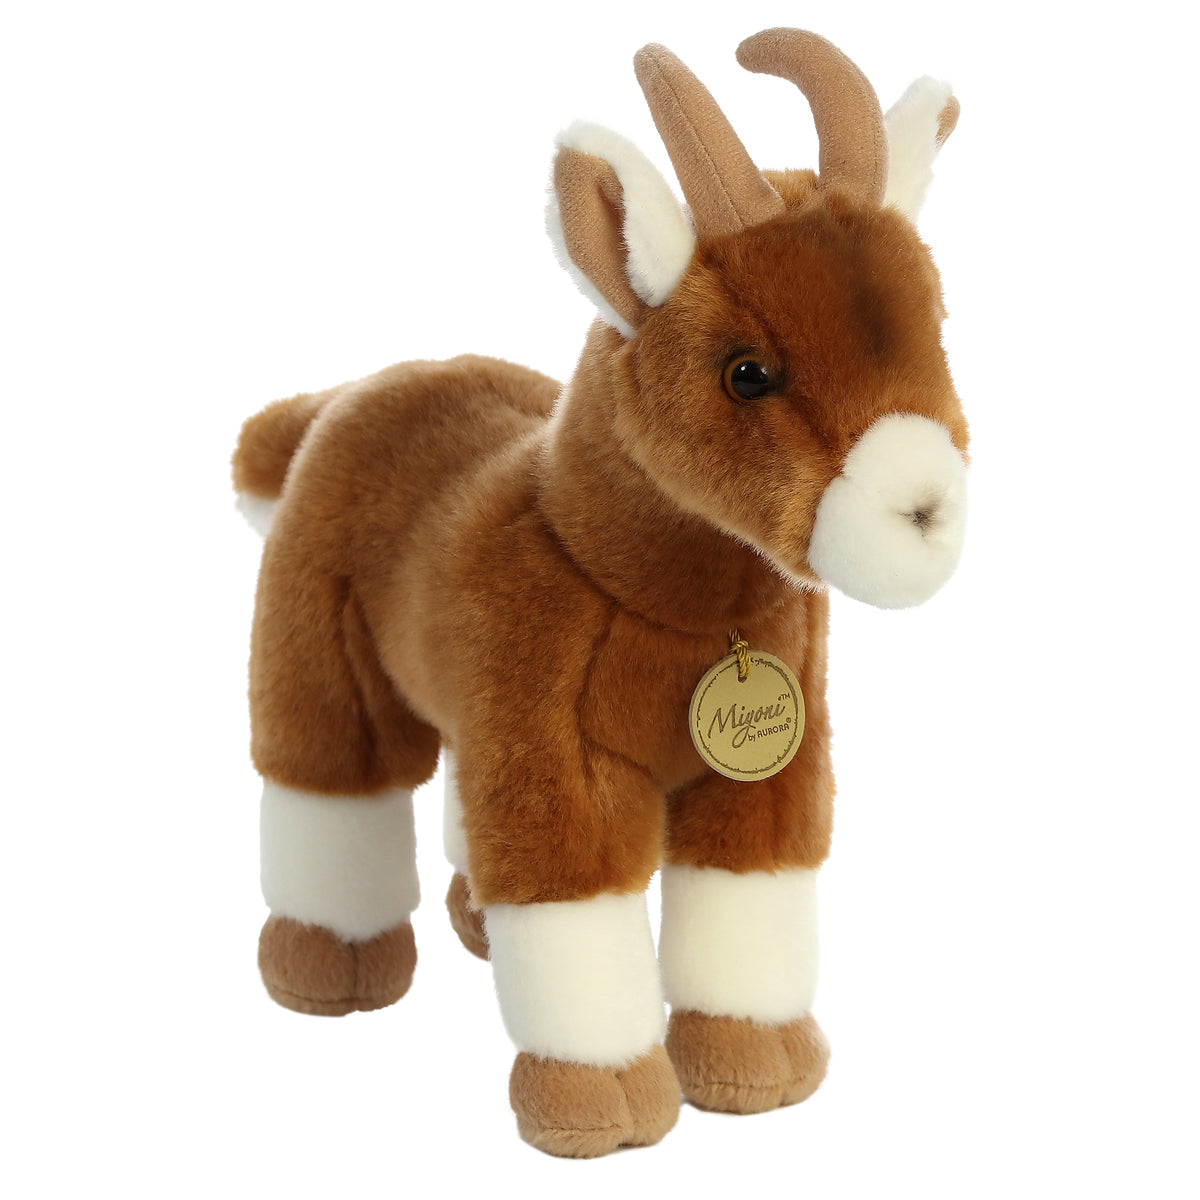 Miyoni Goat plush from Aurora, showcasing detailed craftsmanship and a gentle expression